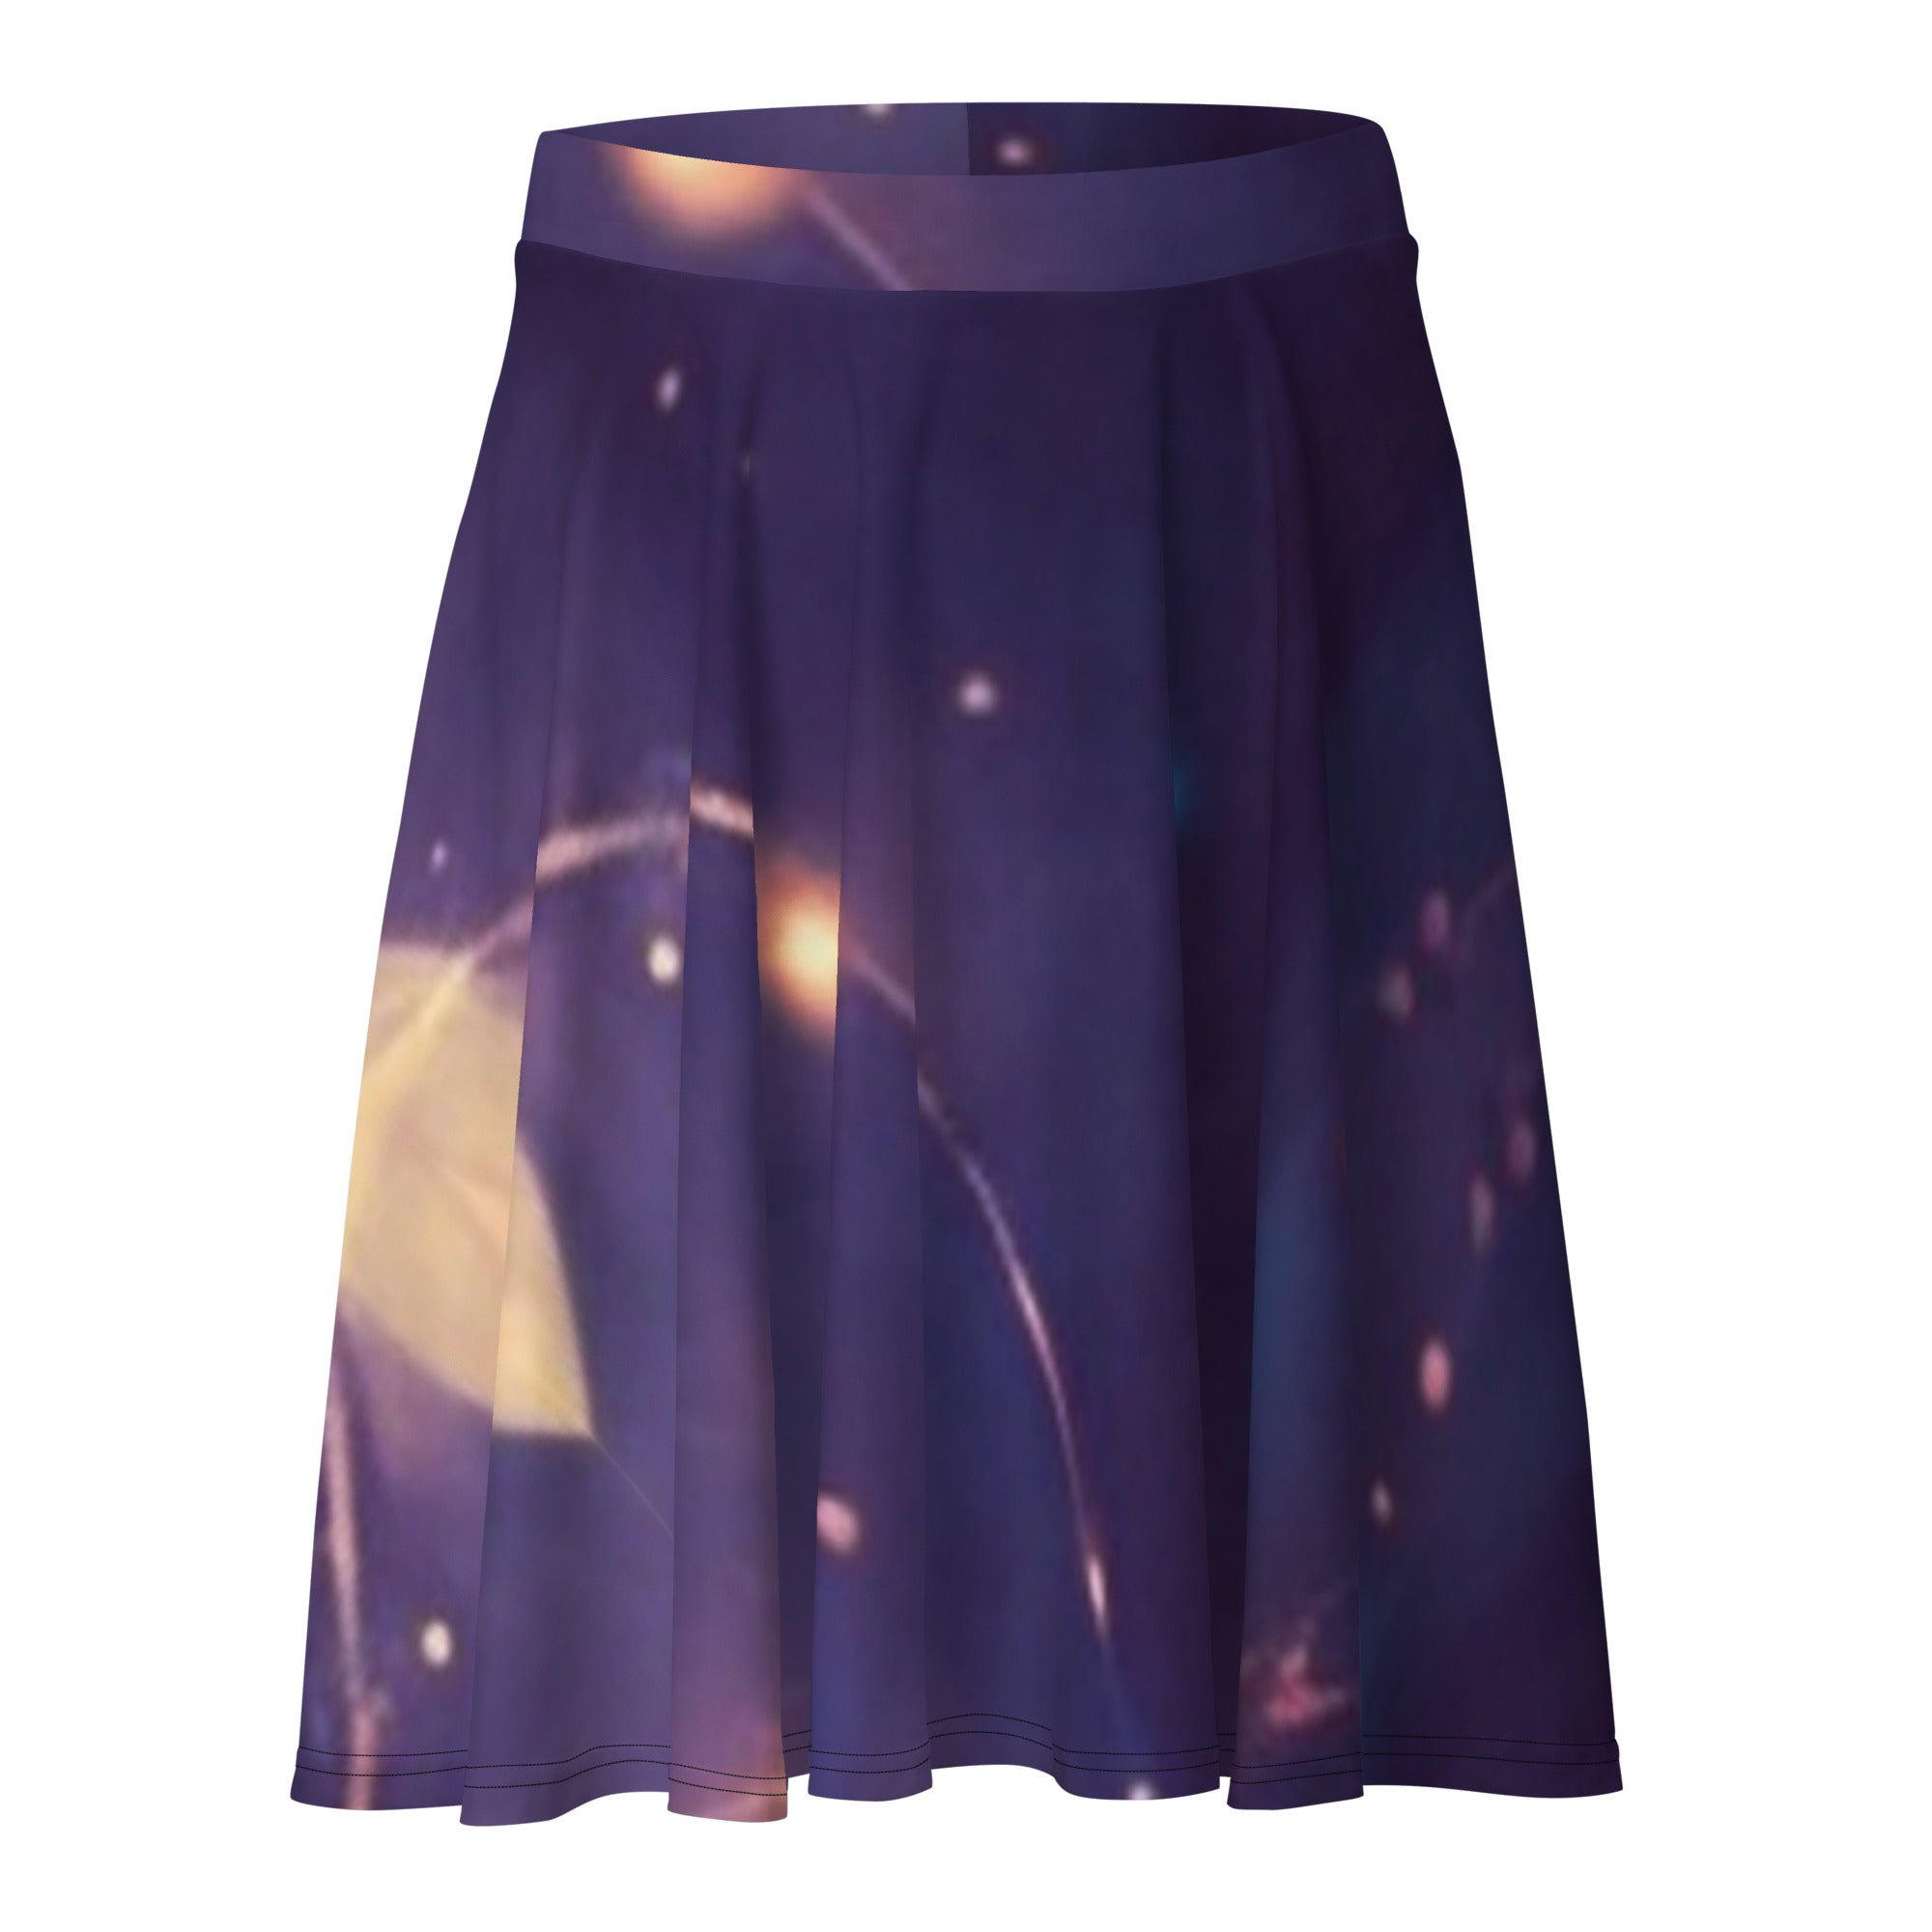 Radiate Confidence: Step into the Spotlight with Our Super-Stylish Shiny Purple Skater Skirt!